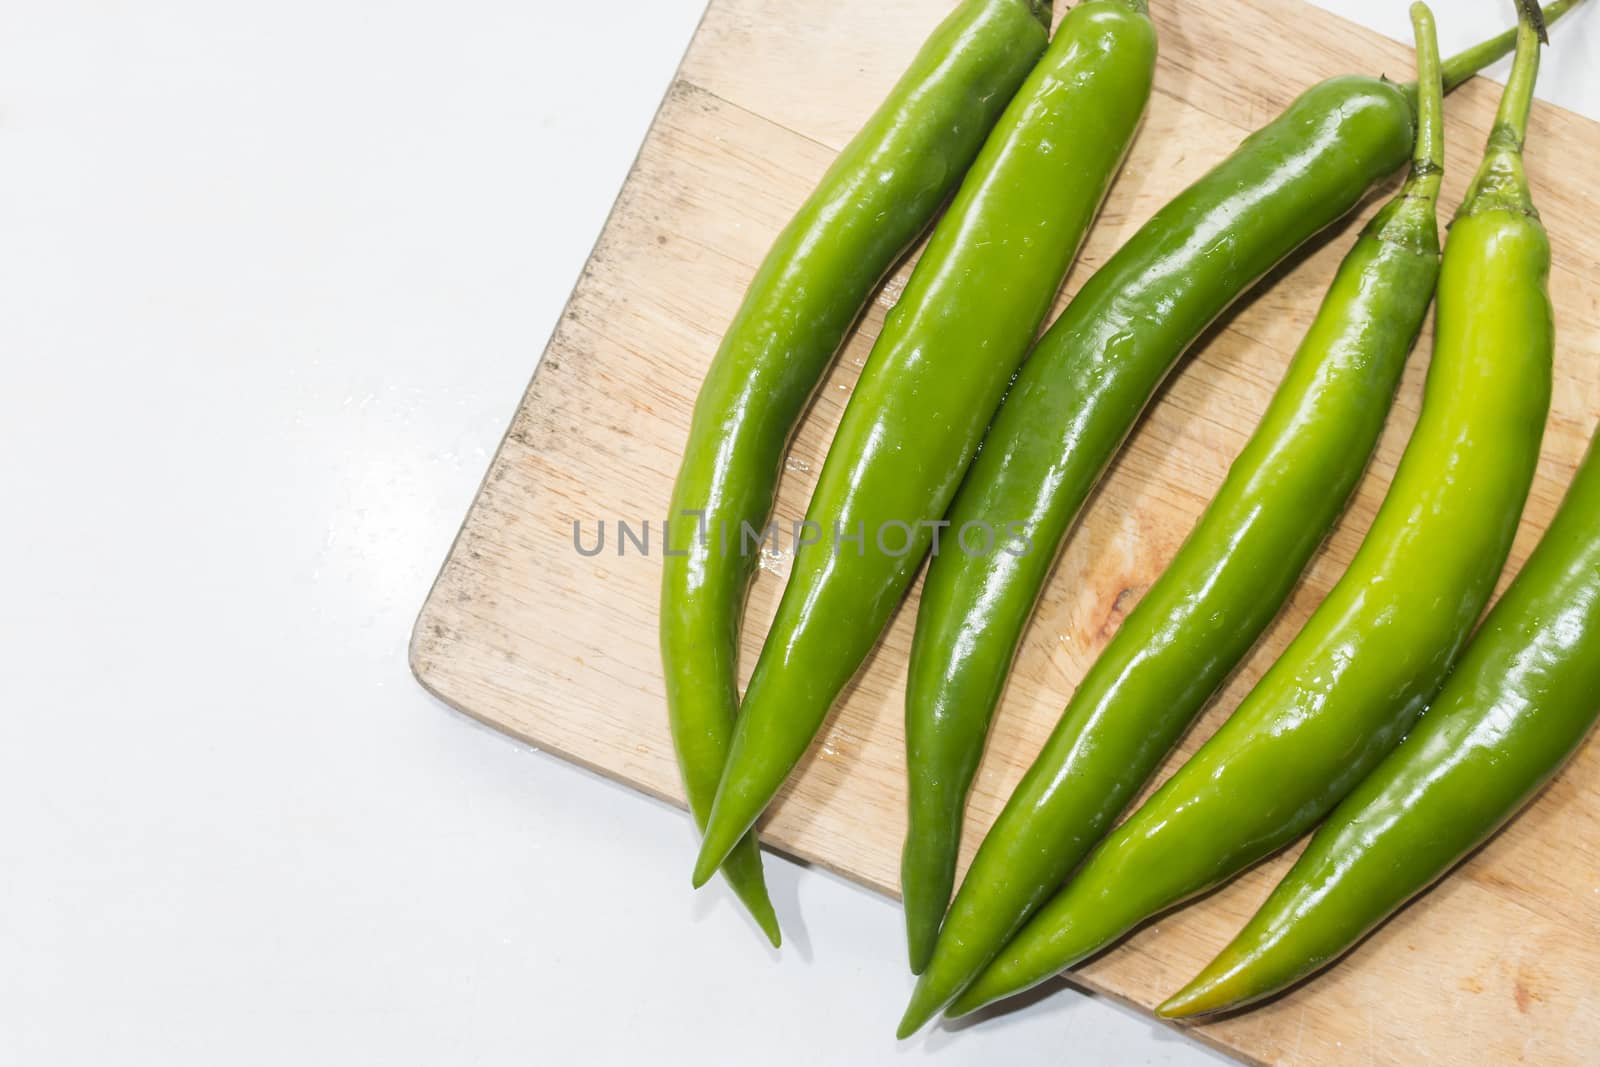  green chilies on a wooden cutting board.